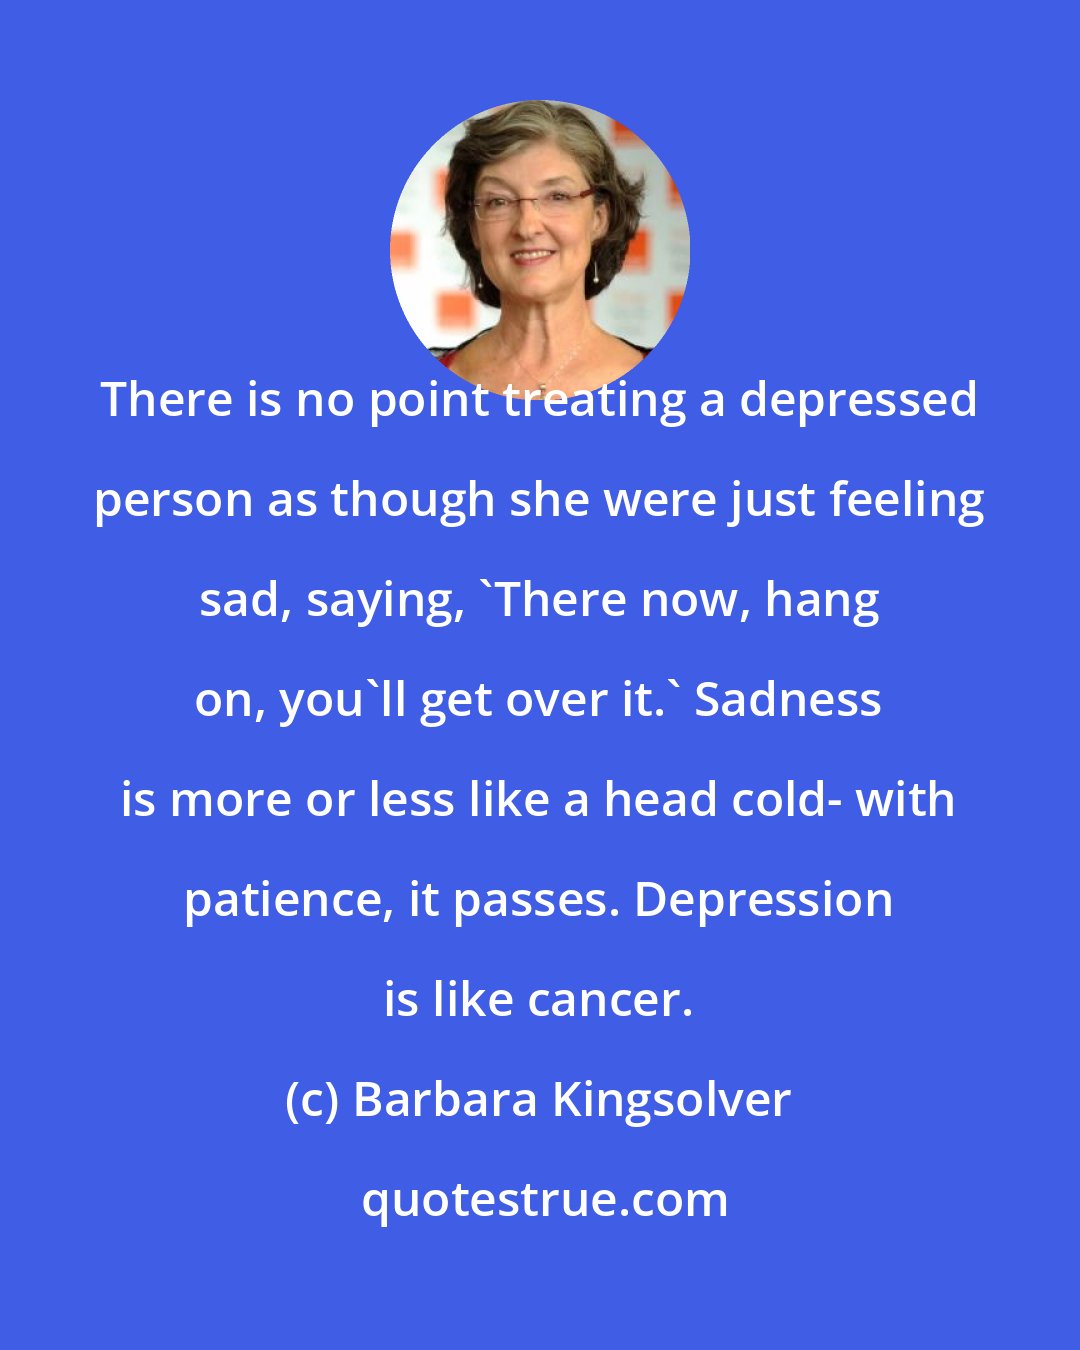 Barbara Kingsolver: There is no point treating a depressed person as though she were just feeling sad, saying, 'There now, hang on, you'll get over it.' Sadness is more or less like a head cold- with patience, it passes. Depression is like cancer.